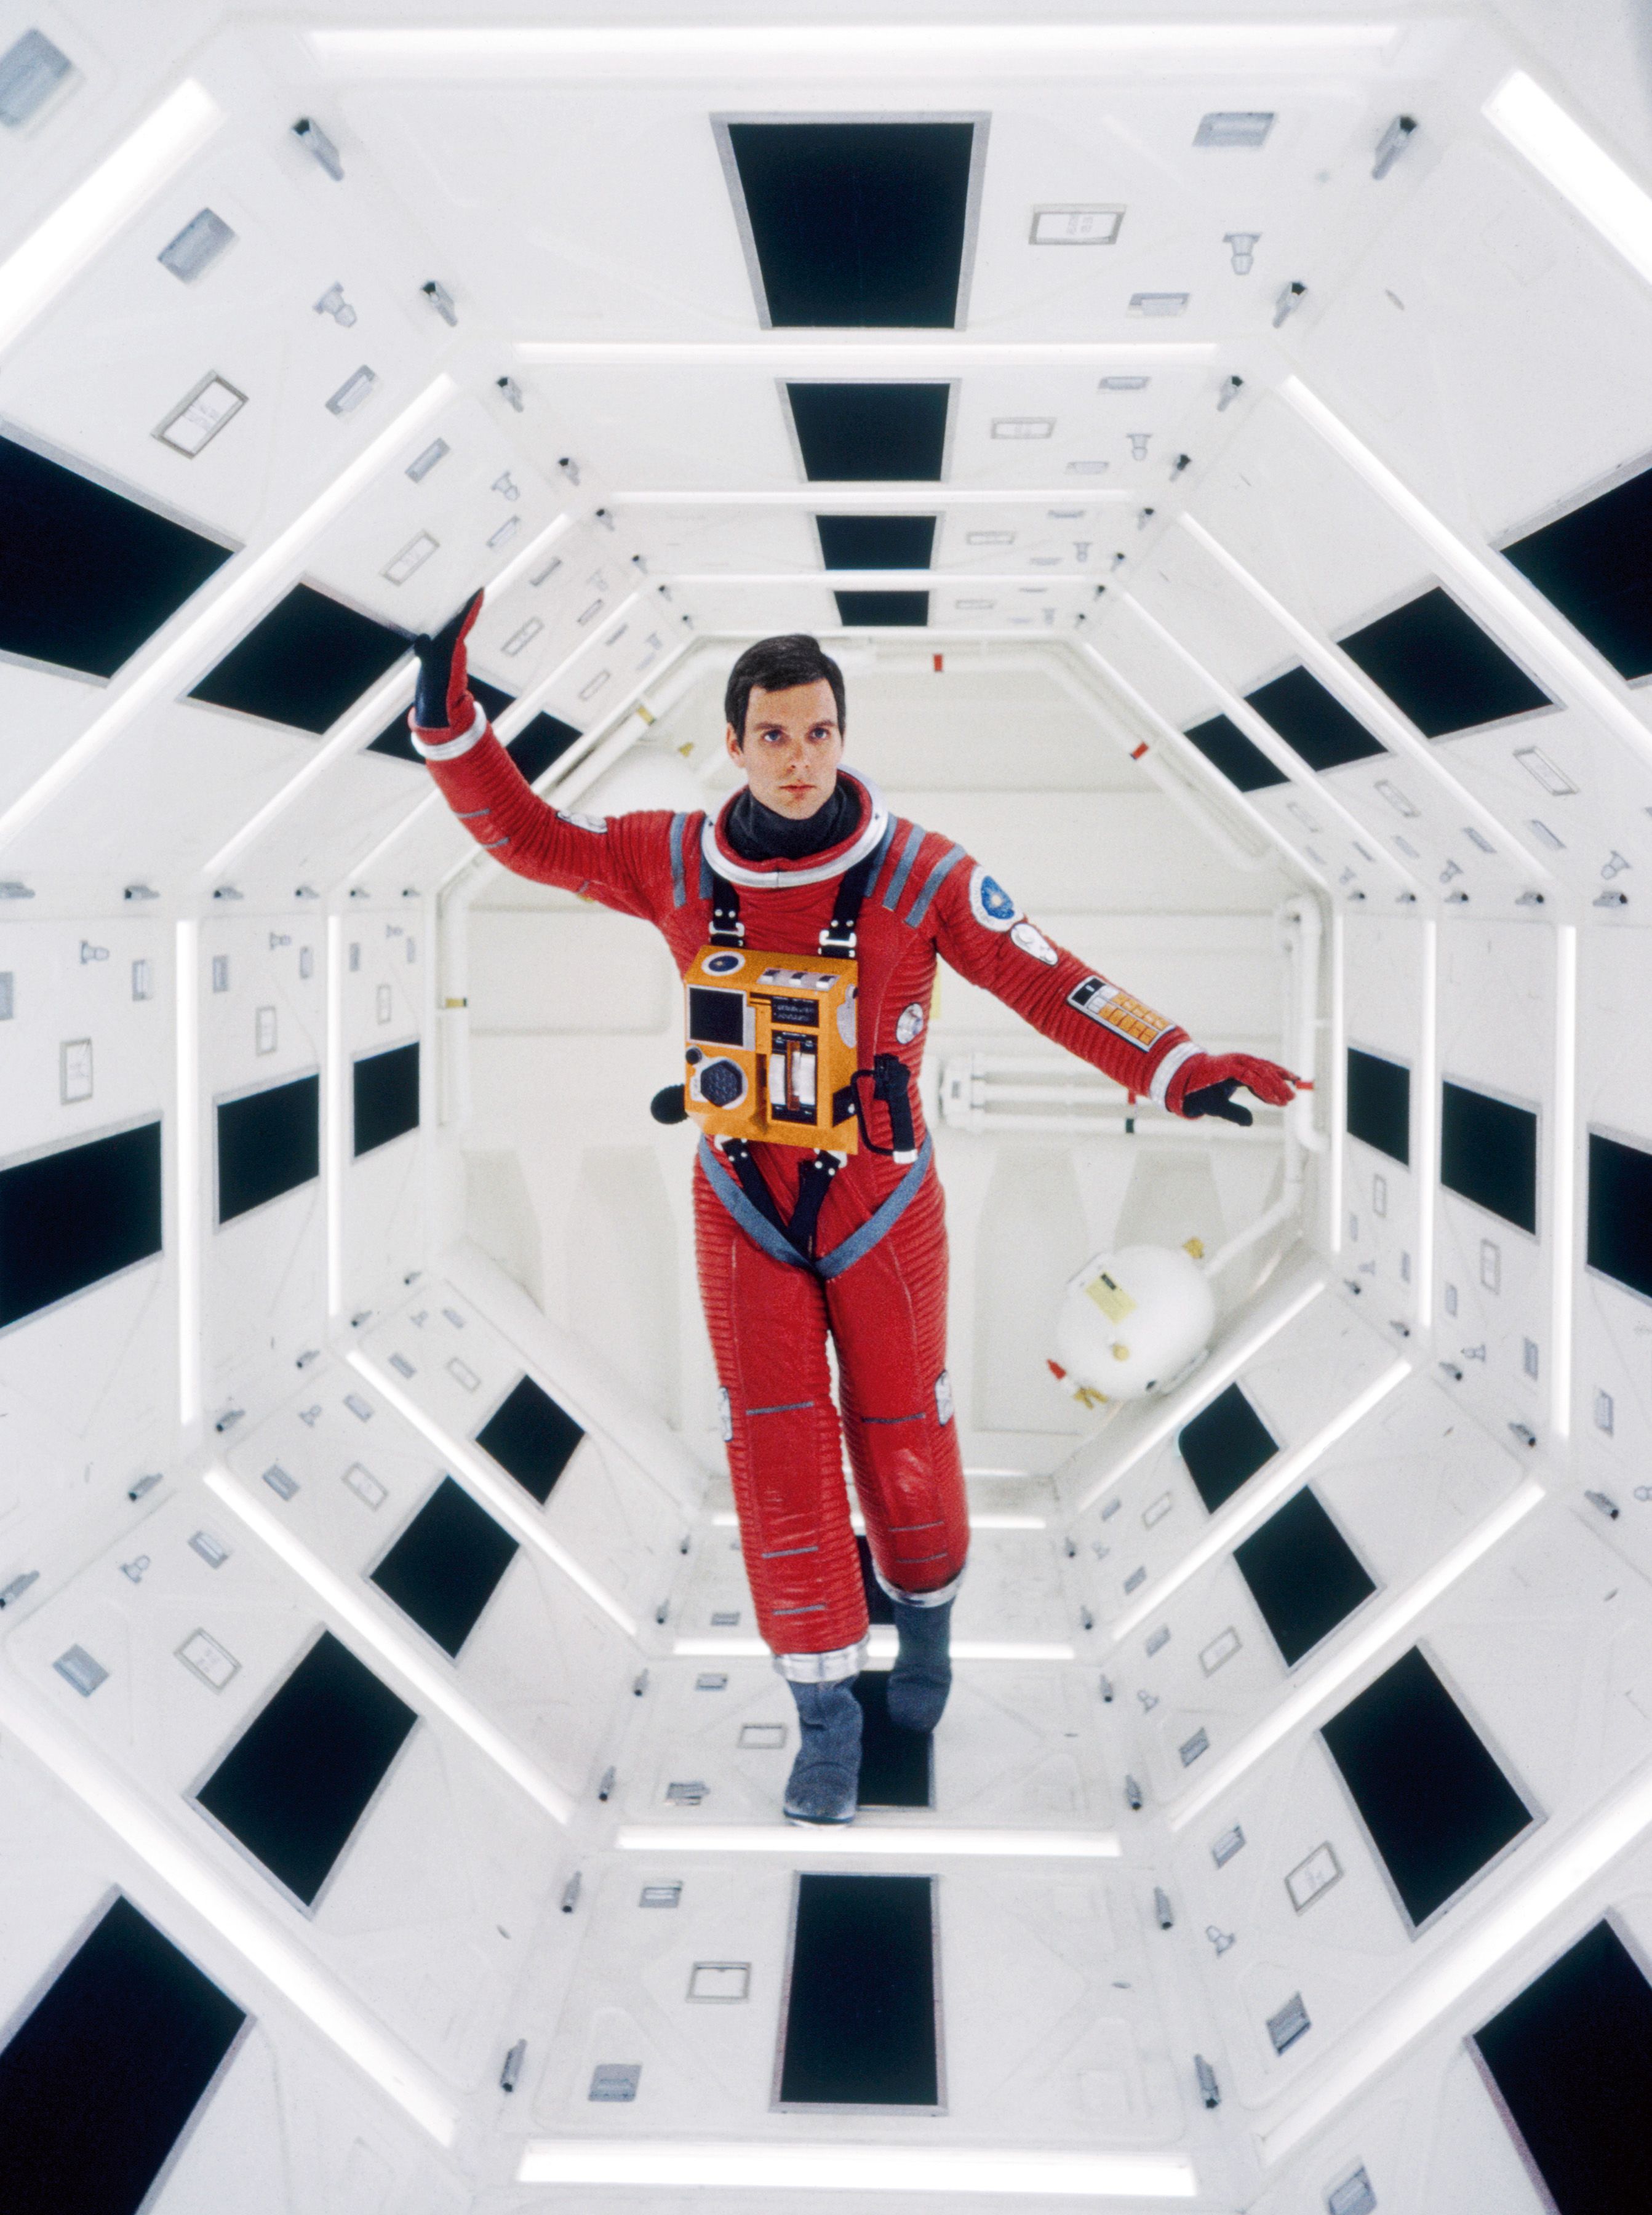 Rare behind-the-scenes photos from '2001: A Space Odyssey